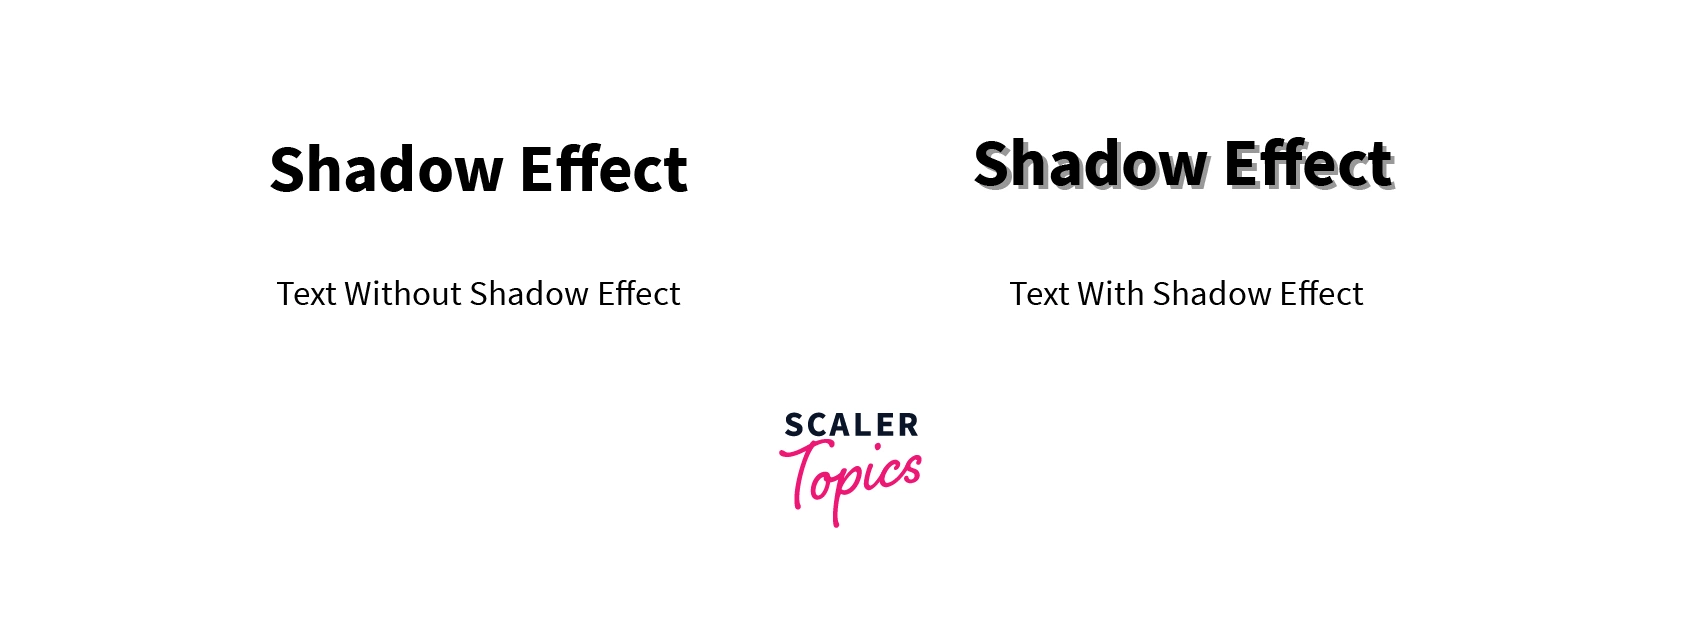 CSS shadow effects